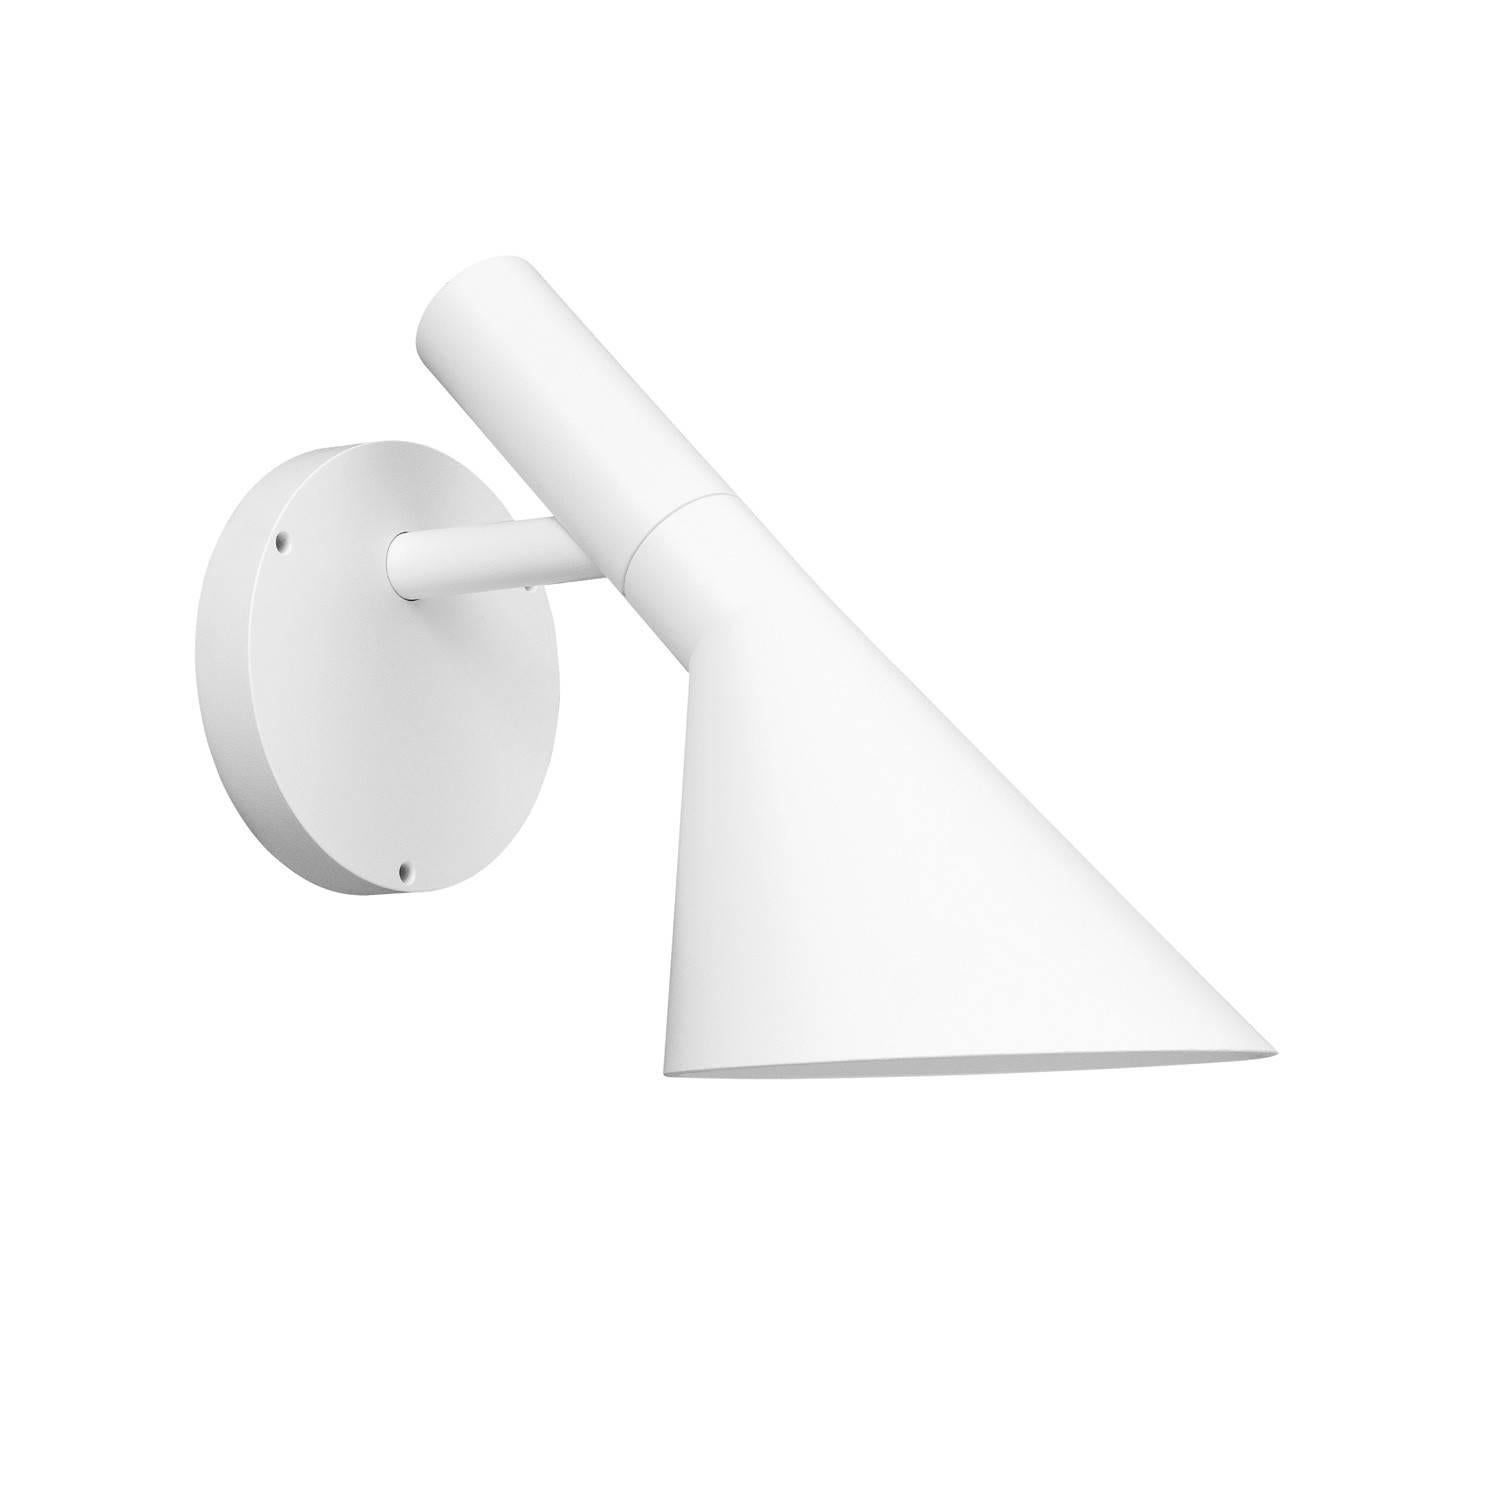 Arne Jacobsen AJ 50 Outdoor Wall Light for Louis Poulsen in Grey In New Condition For Sale In Glendale, CA